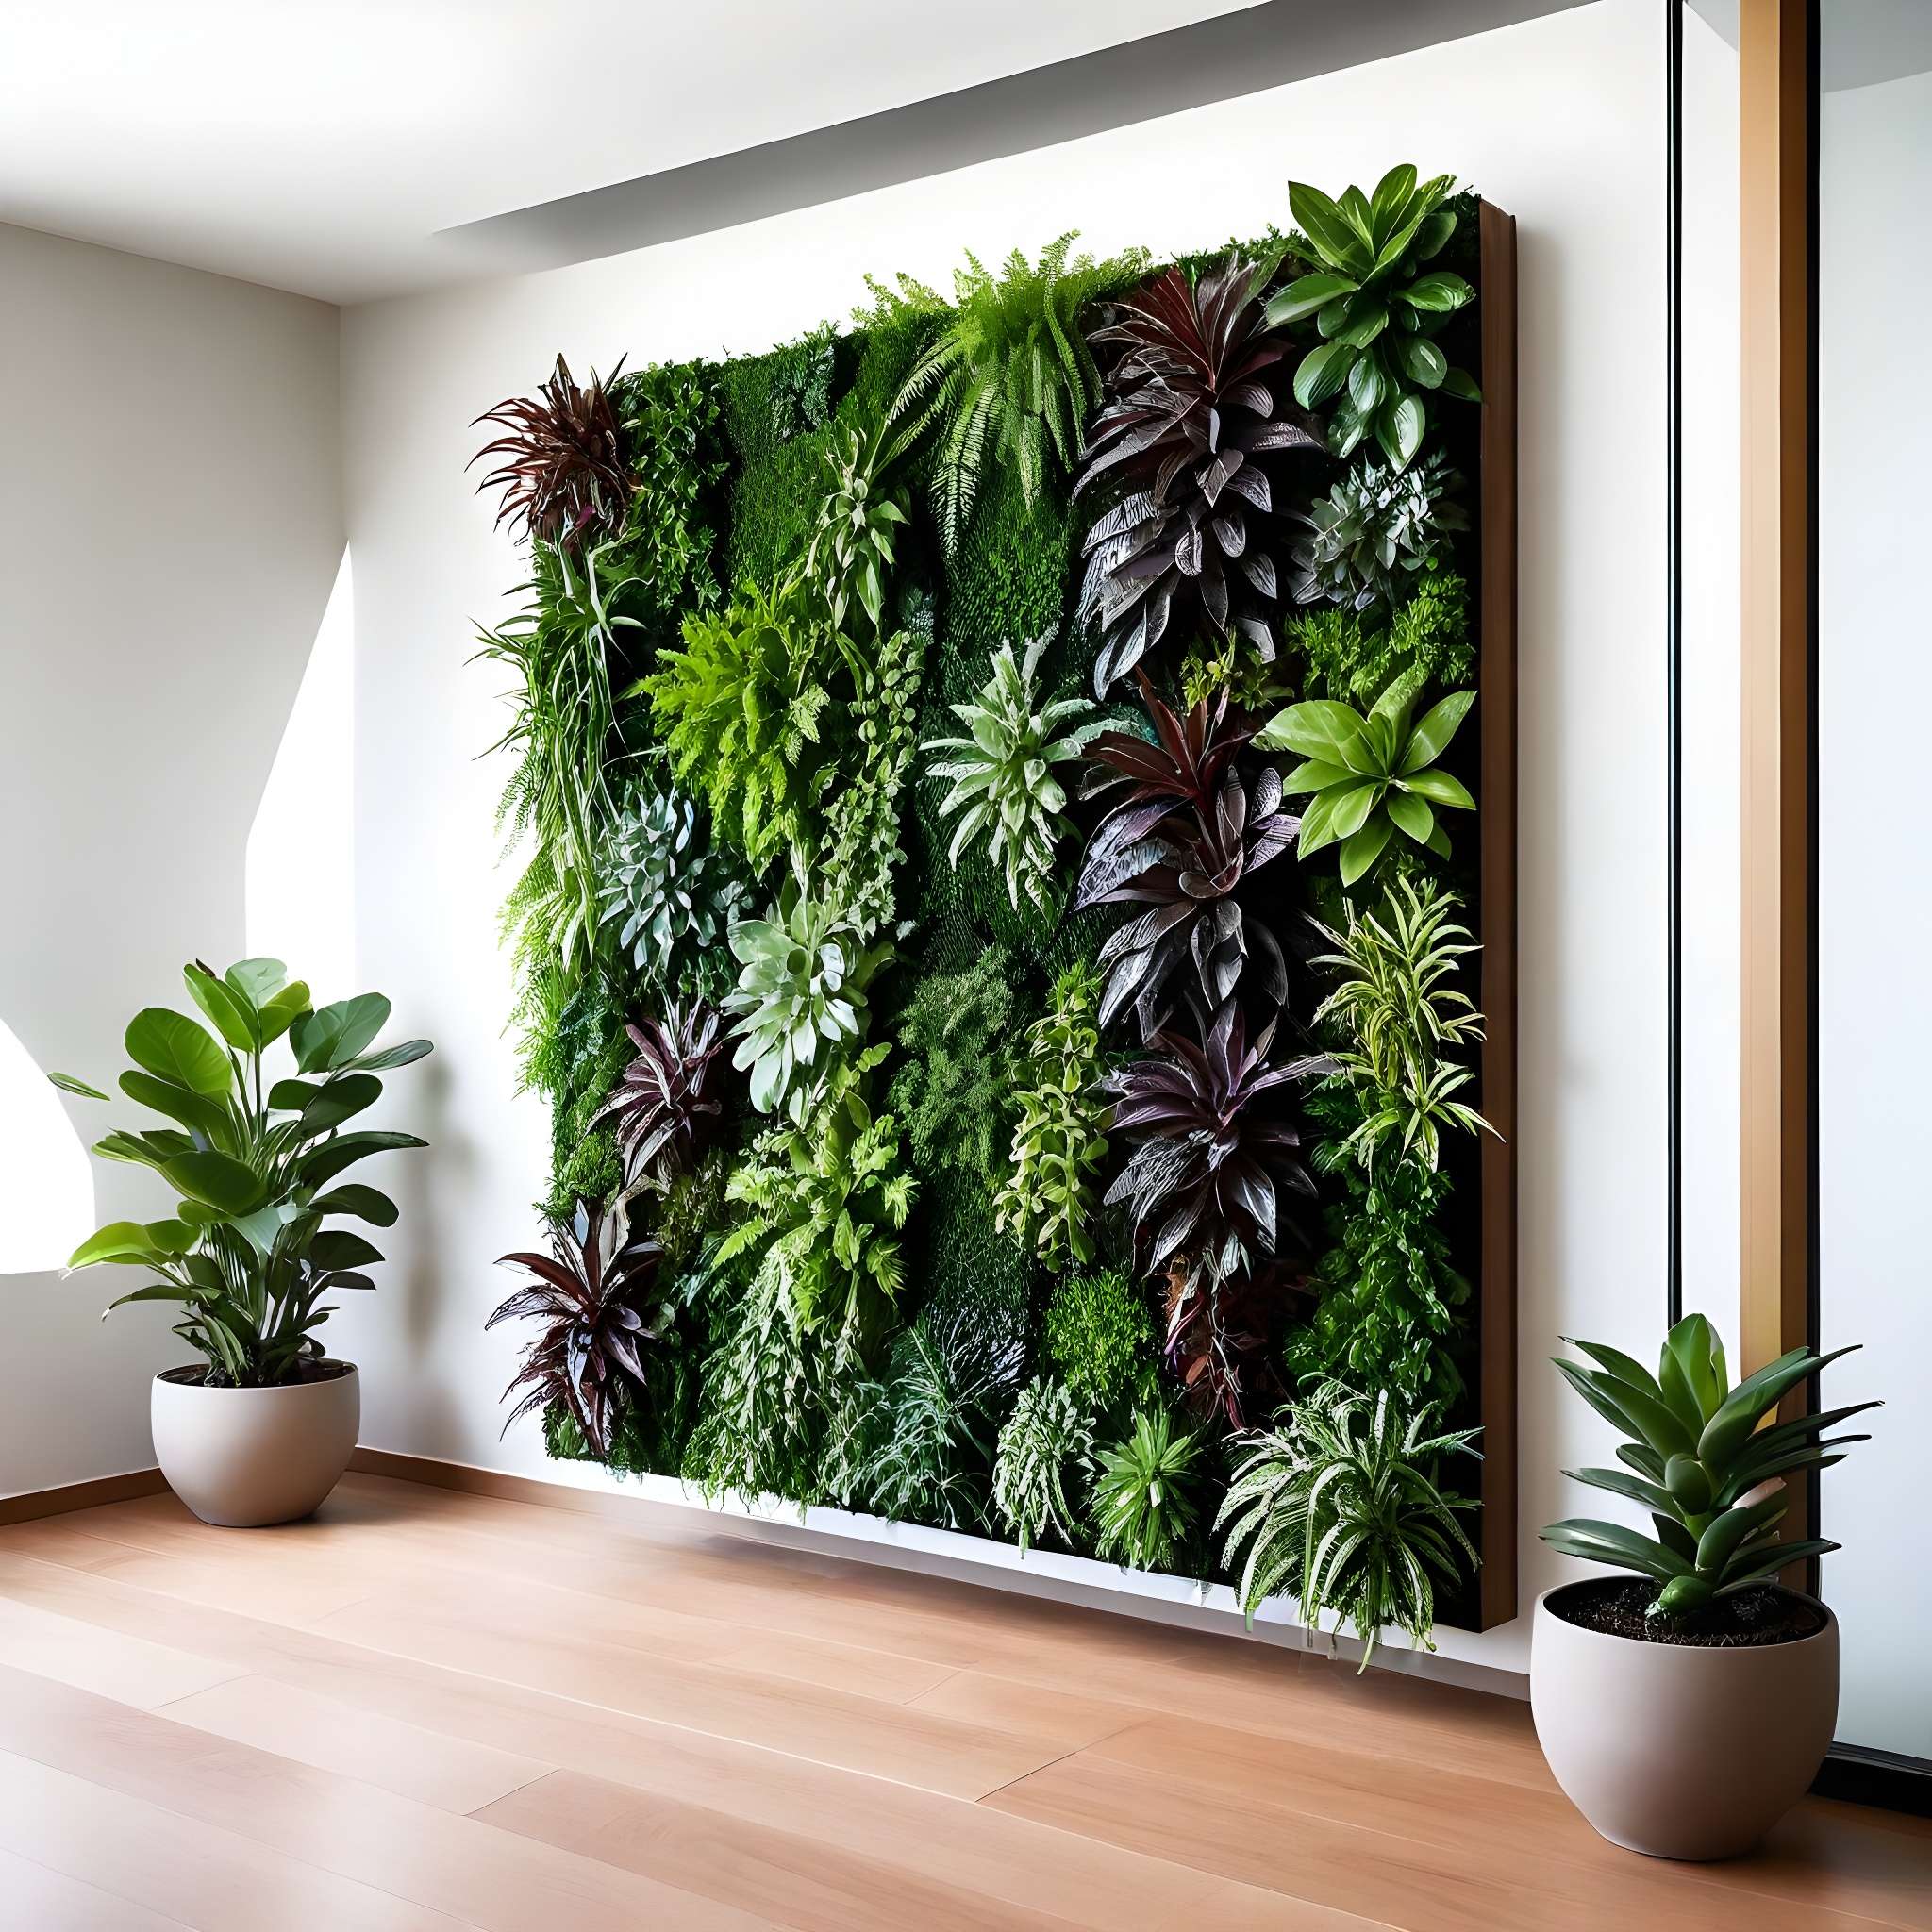 Modern Greenery with a Living Wall Embrace a contemporary vibe with a glass living wall filled with greenery. This vertical garden not only makes a striking statement but also contributes to a cleaner, more oxygenated entryway environment. Opt for low-maintenance plants like succulents and ferns for a lush, hassle-free display. Top Tip: Depending on the scale of your project, living wall systems can range from DIY-friendly kits to professional installation and maintenance services.